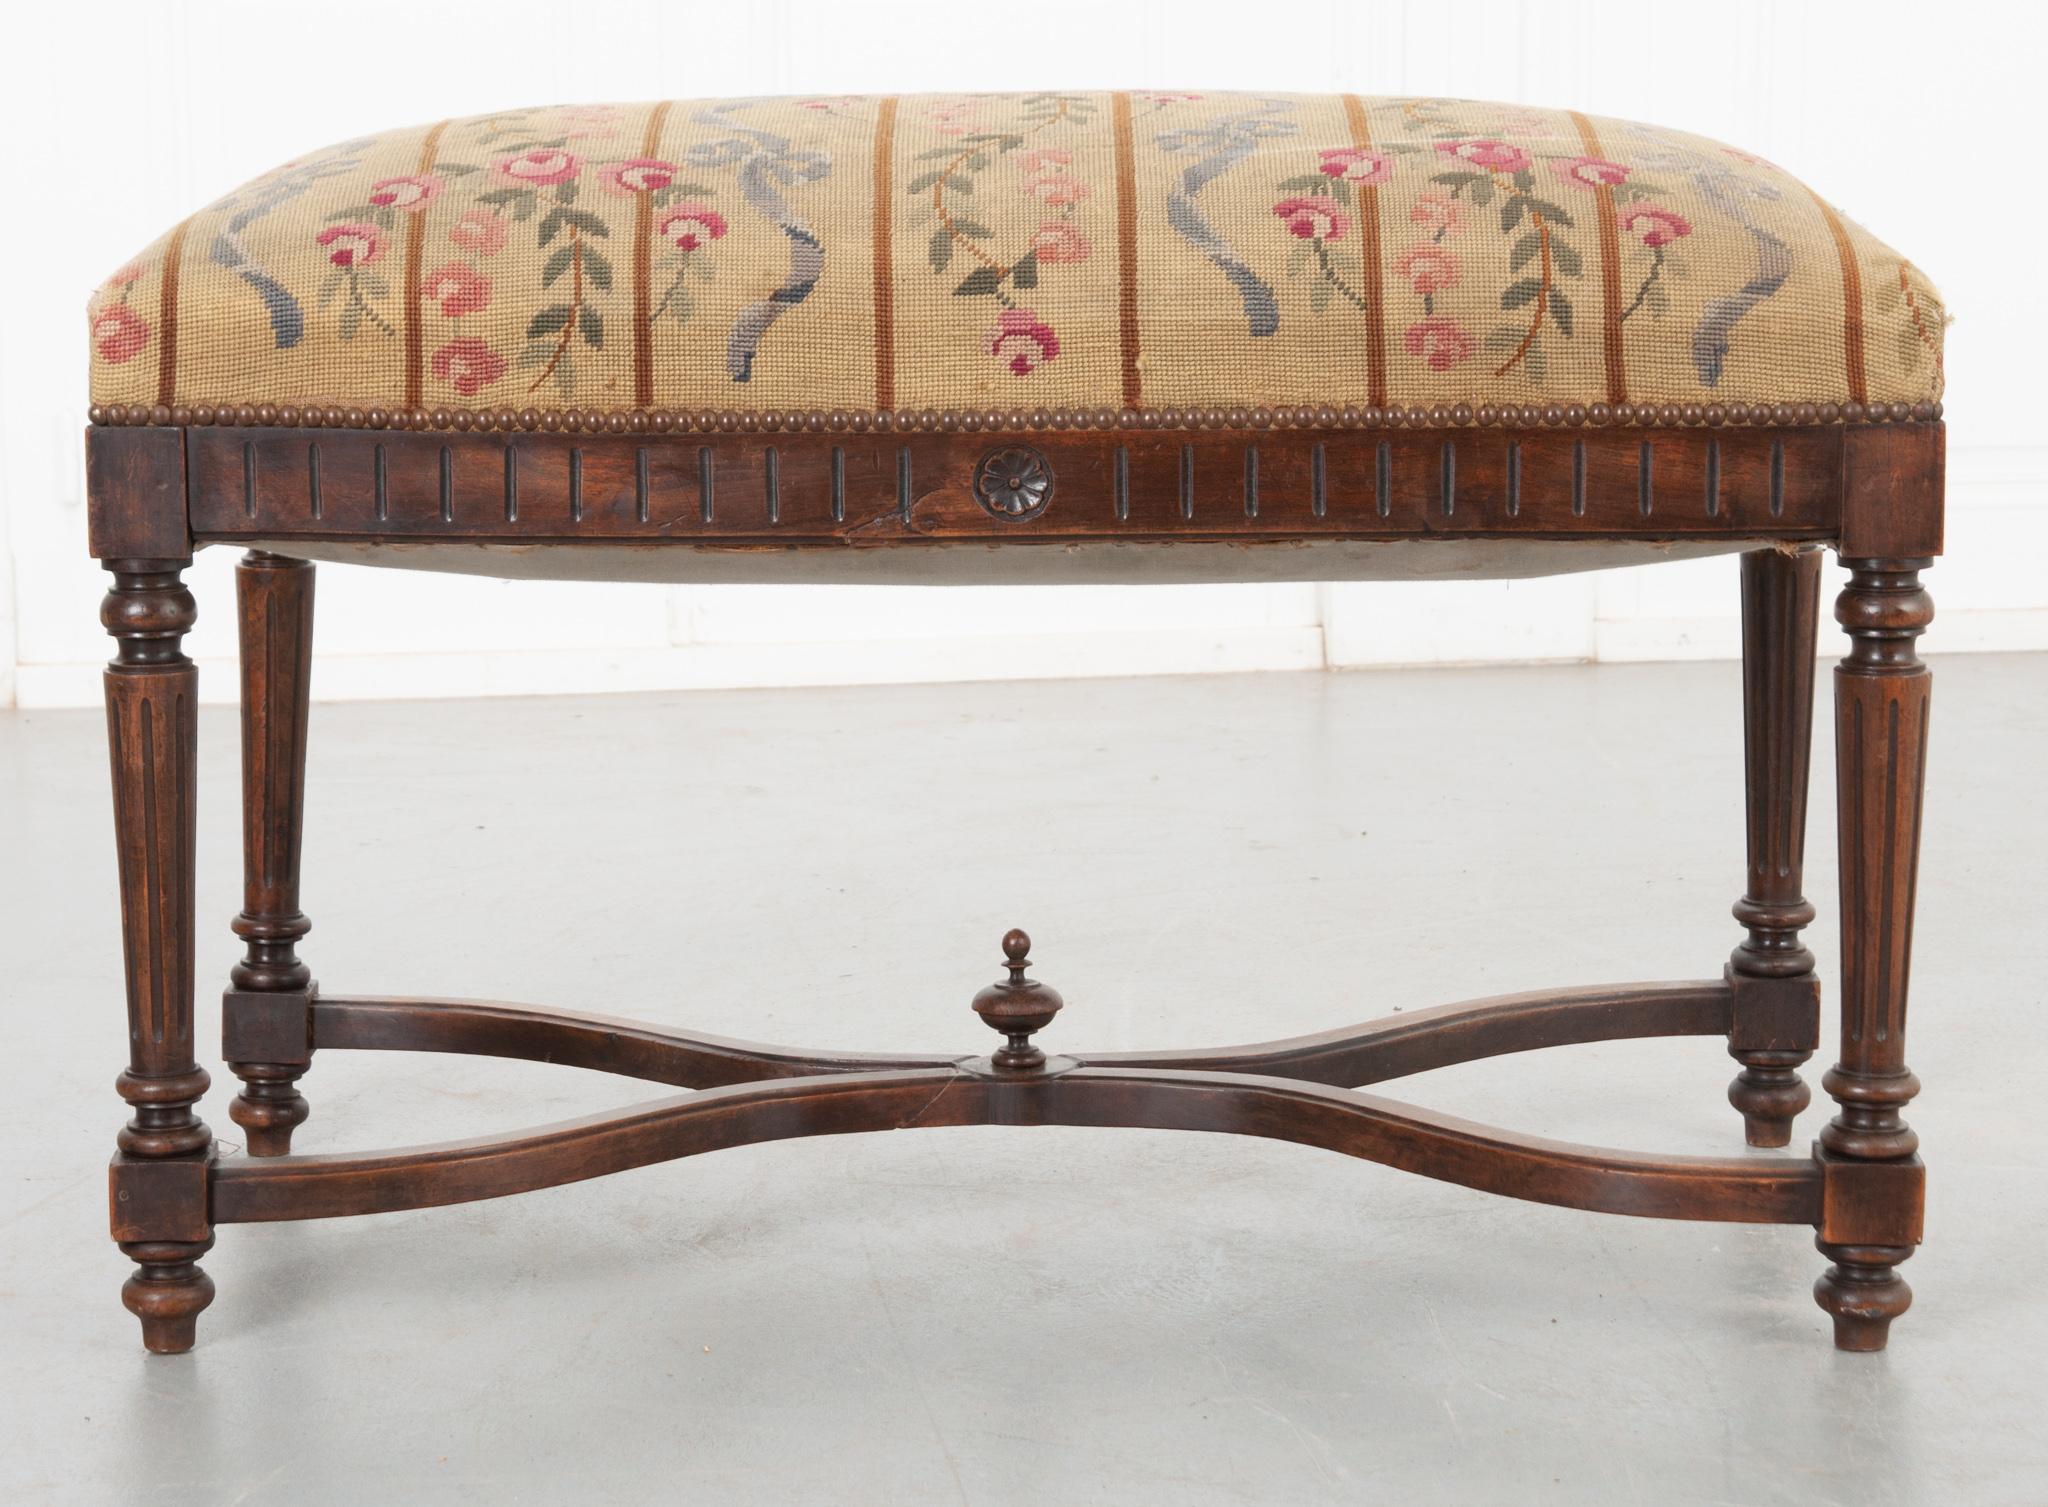 A wonderful walnut bench from 19th century France! The needlepoint upholstery is slightly worn but retains its colorful hand-crafted details; pink roses on the vine and blue ribbon tied in bows. The fabric is secured by a perimeter of decorative